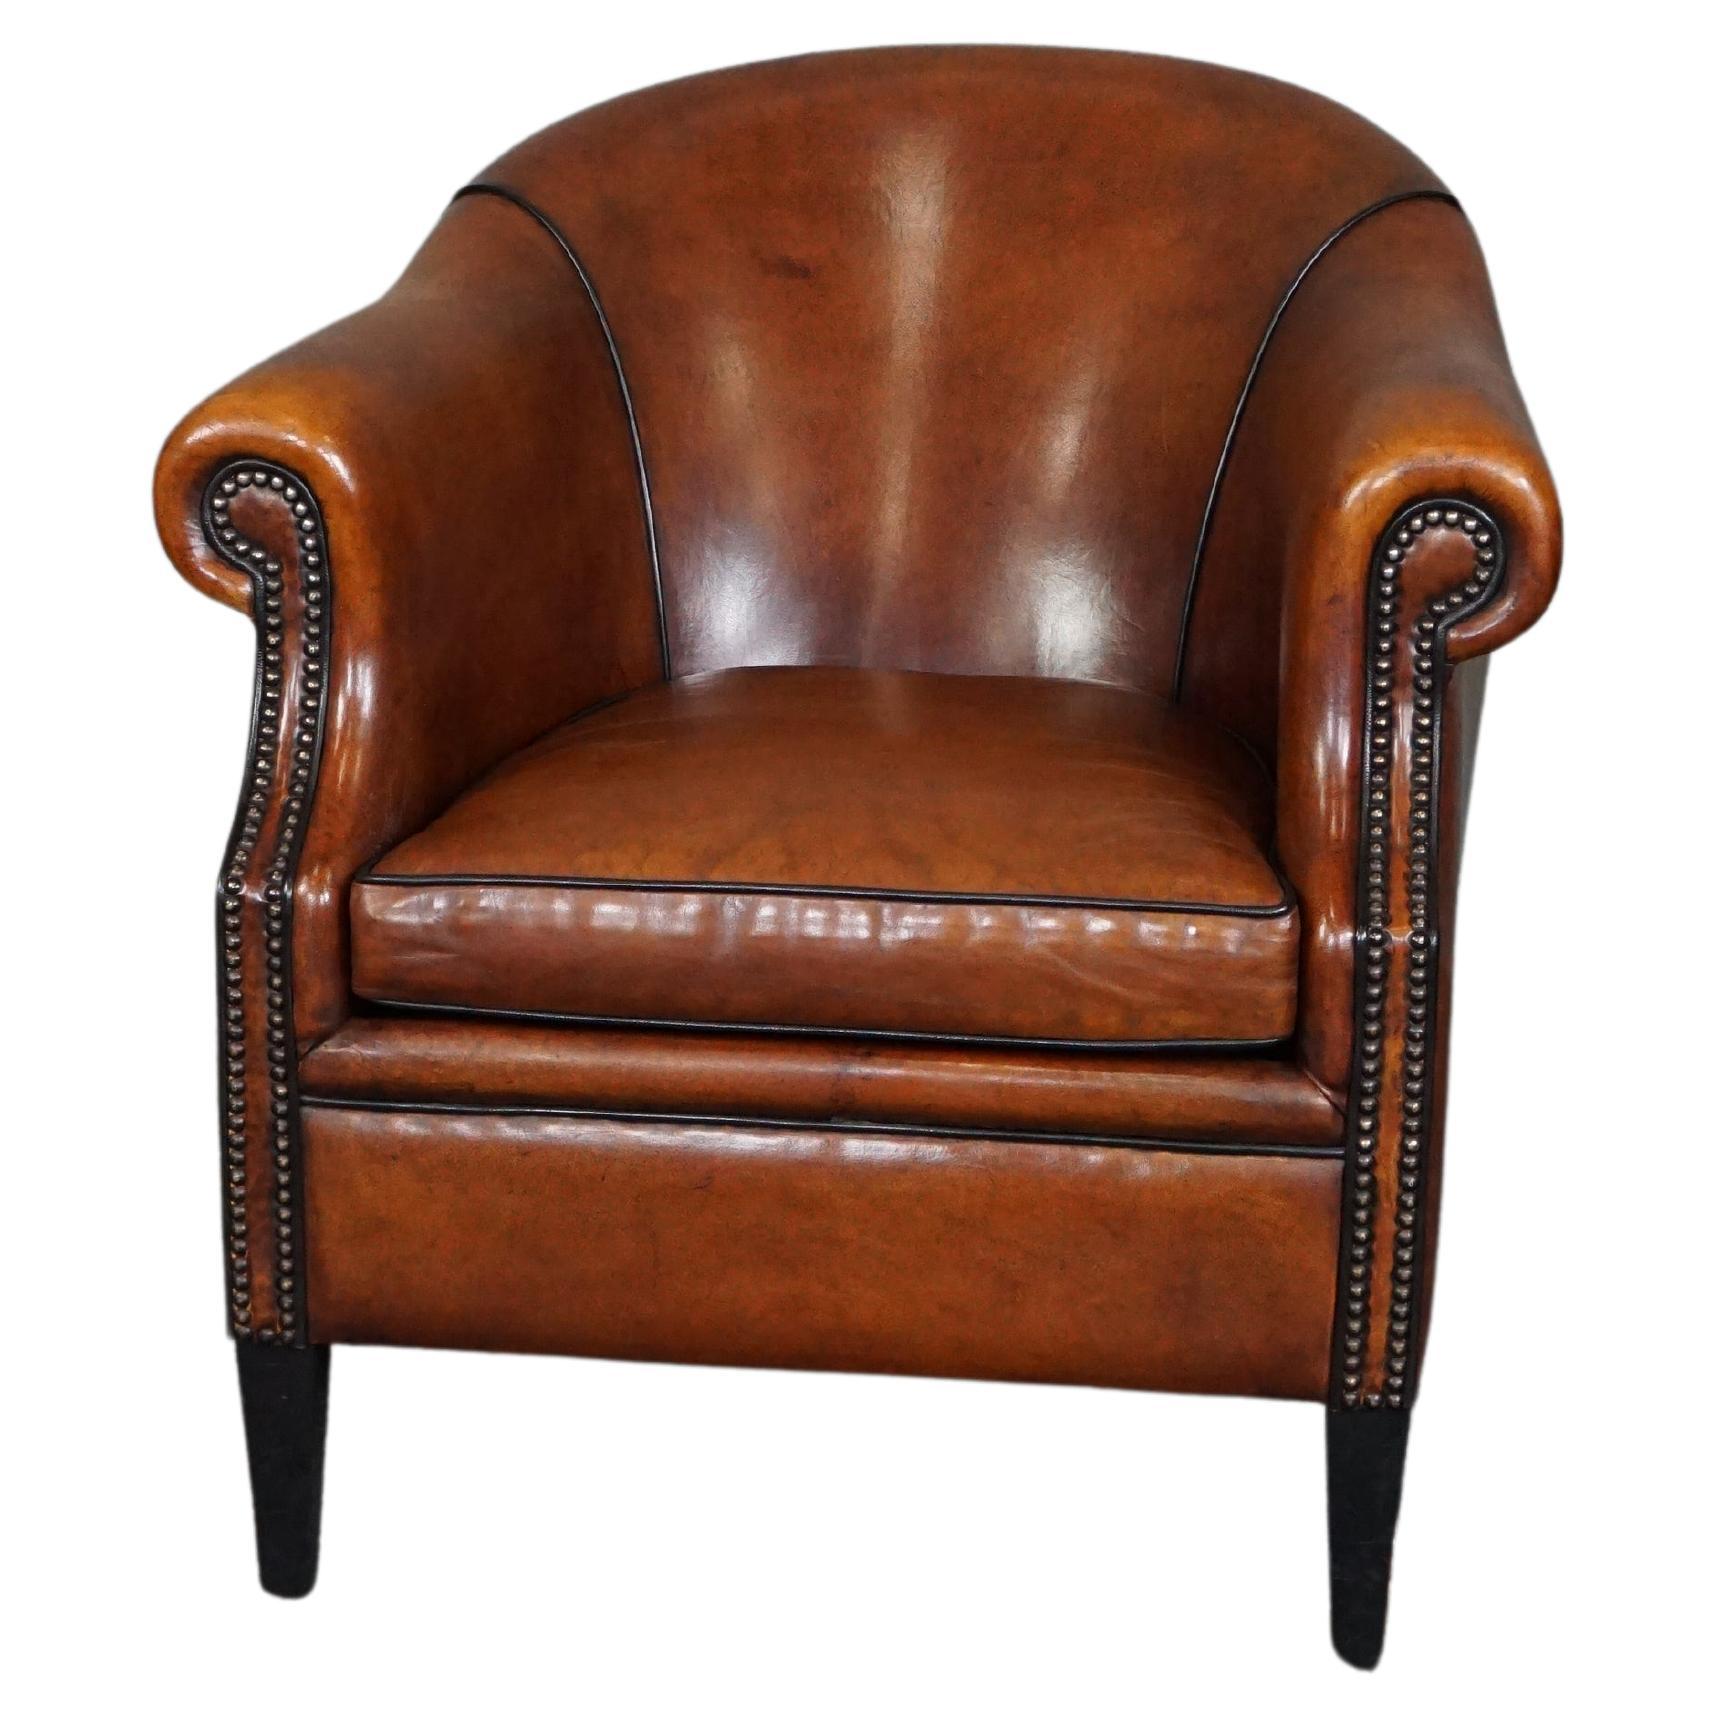 Very expressive sheep leather club chair with black piping